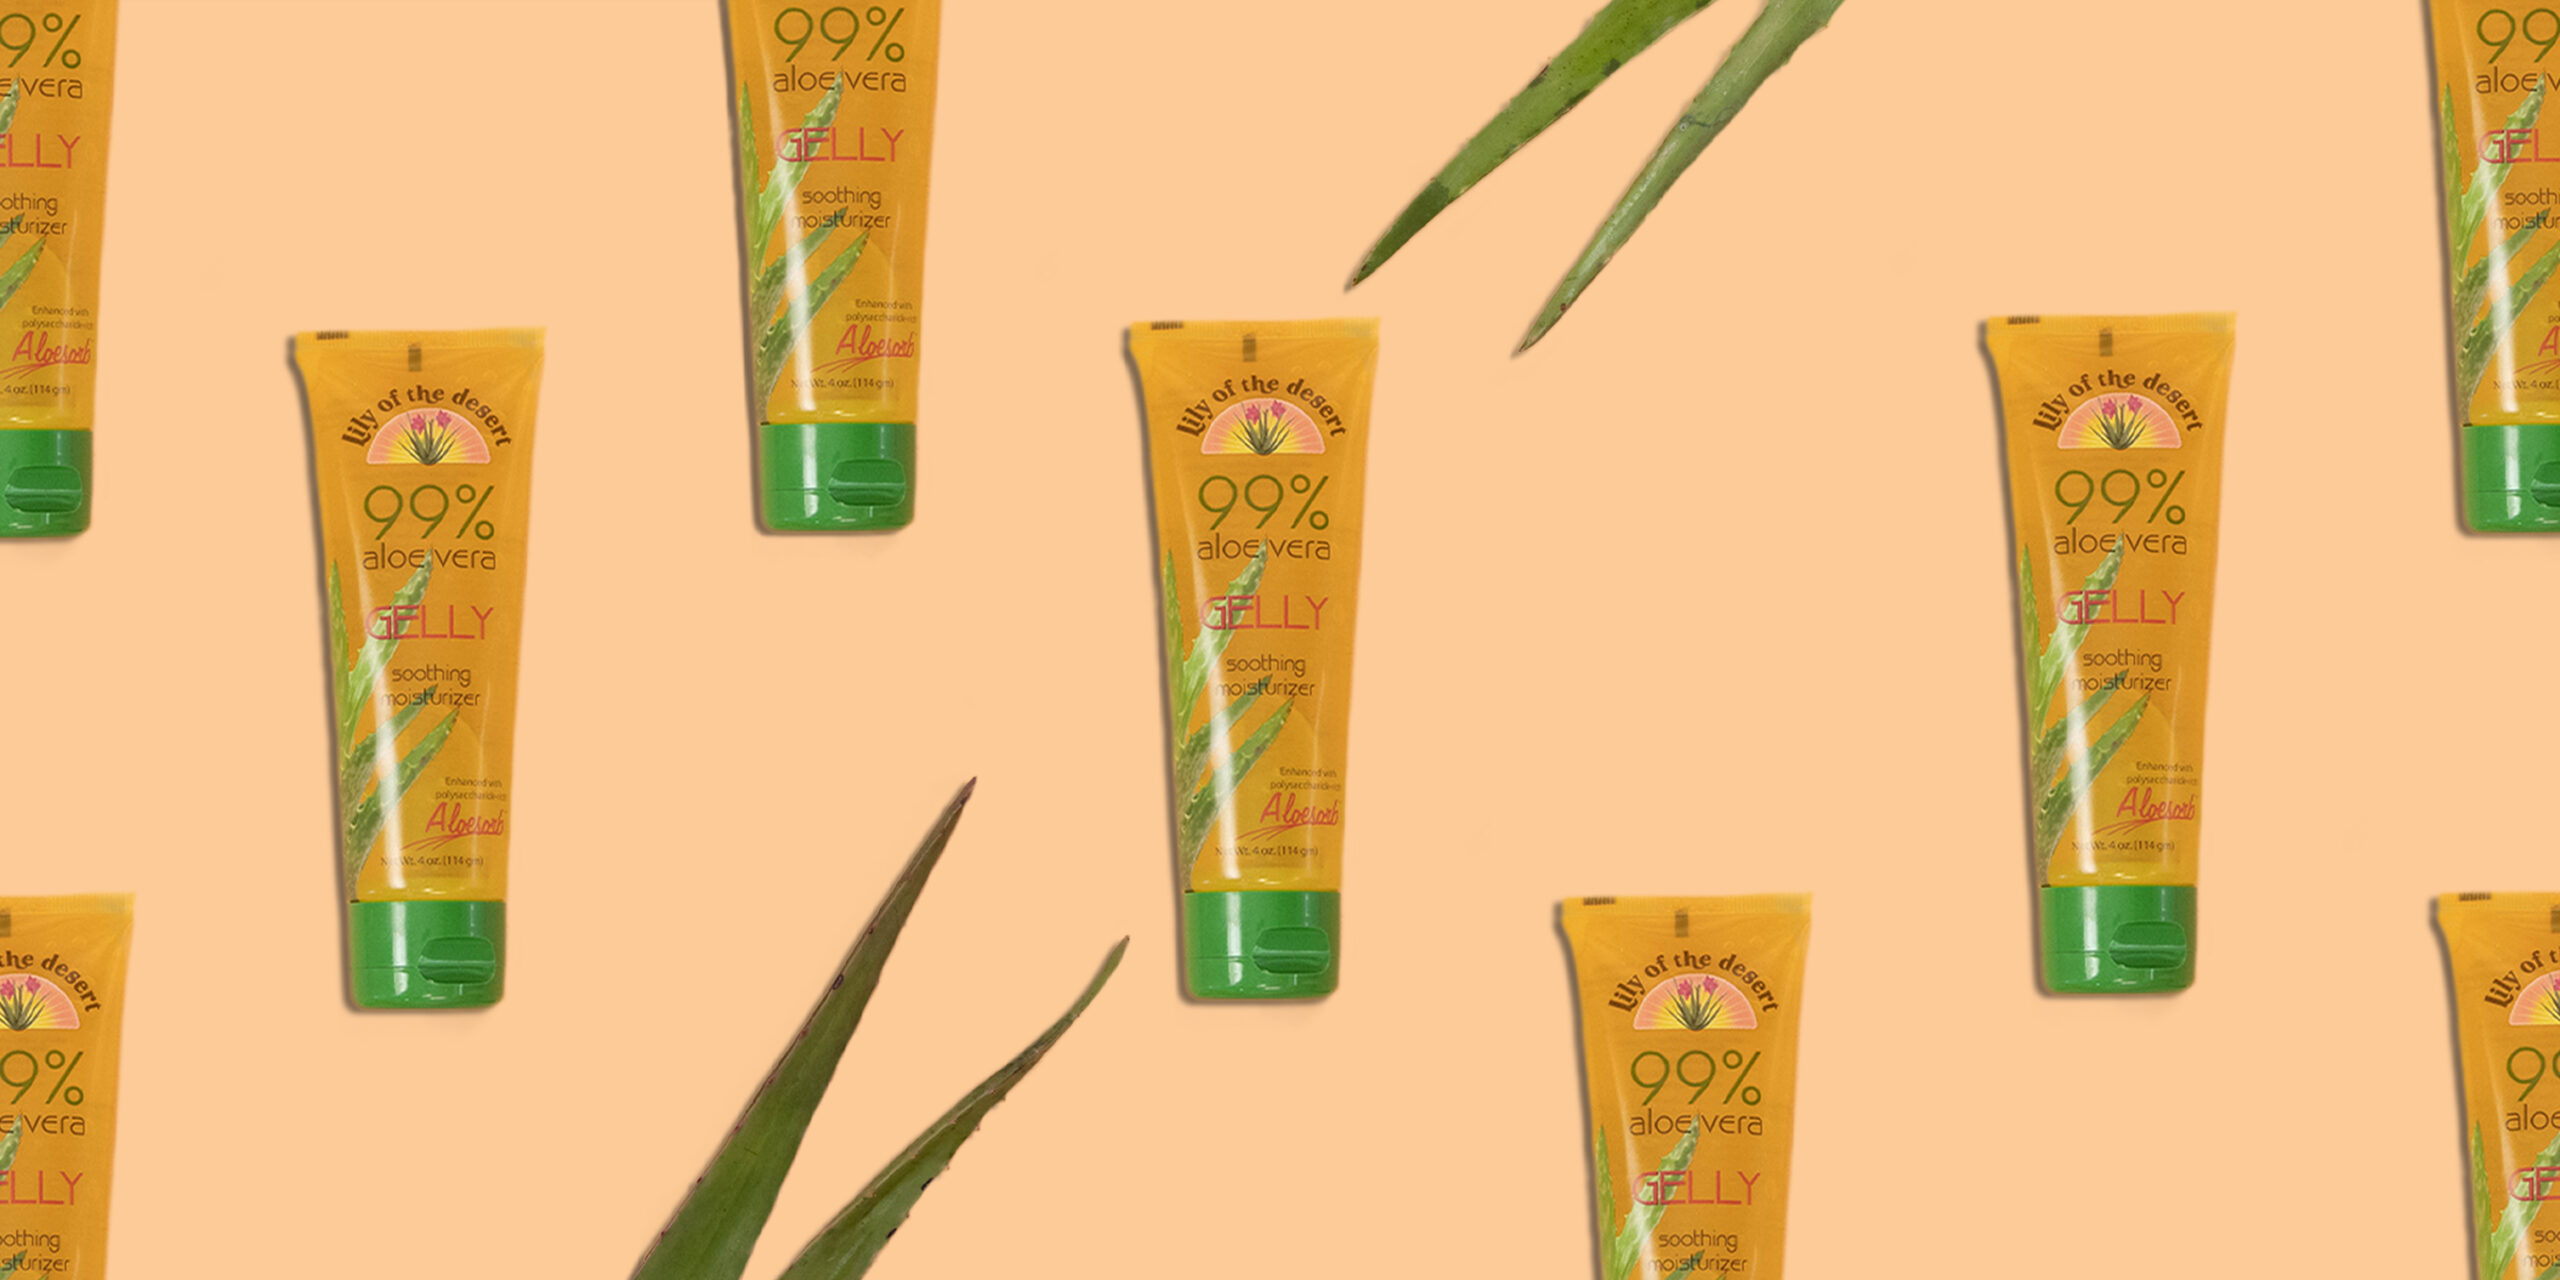 Use 99% Aloe Vera Gelly to support skin hydration - LIly of the Desert